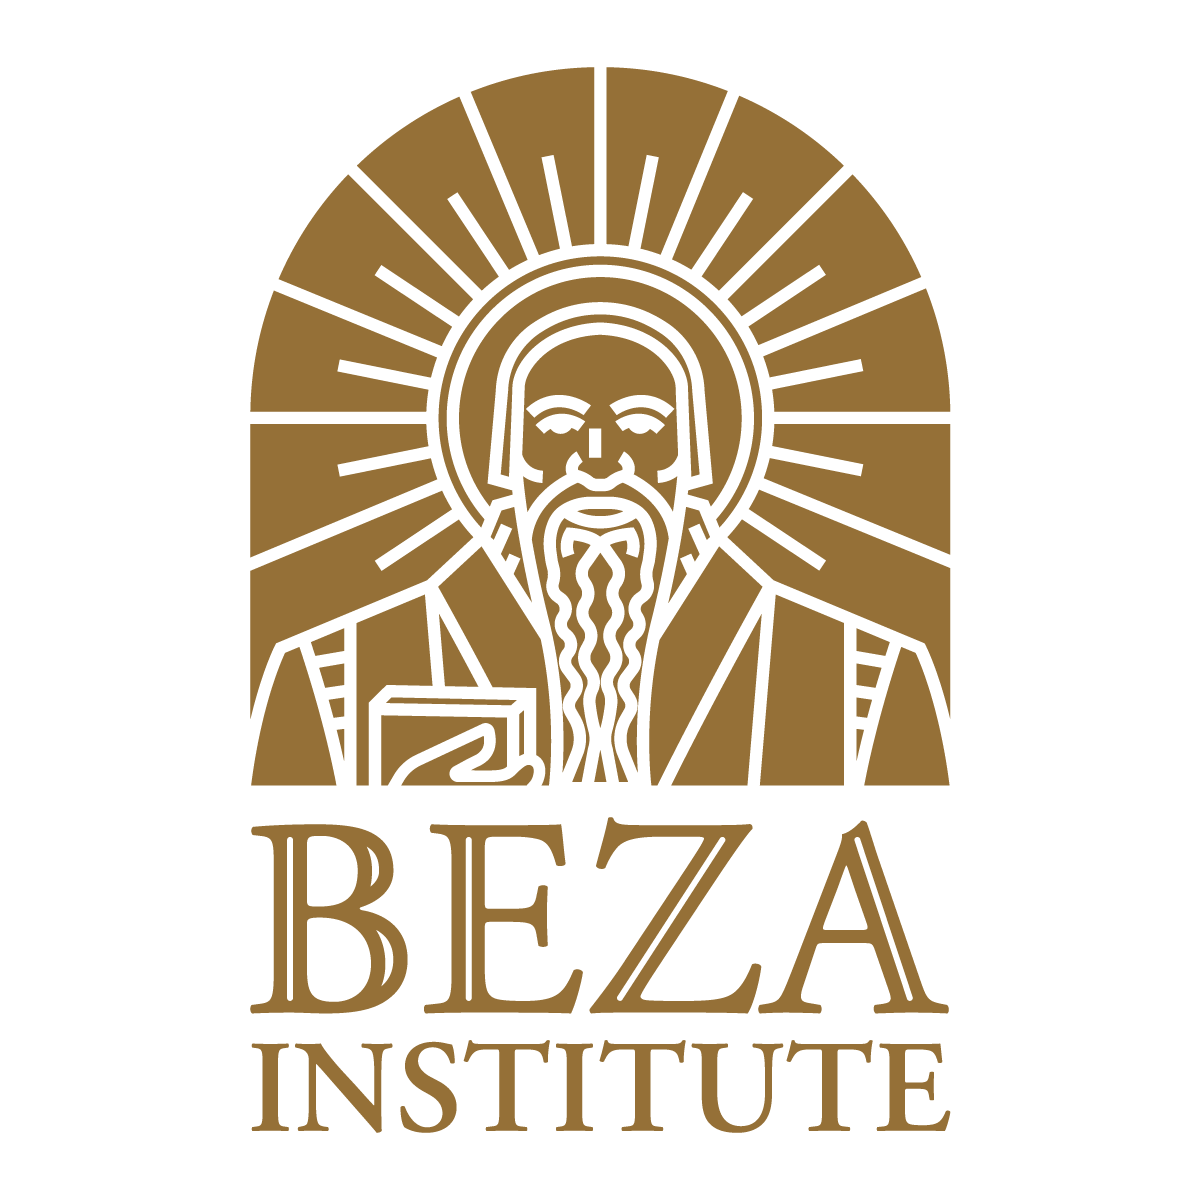 Beza Institute for Reformed Classical Education